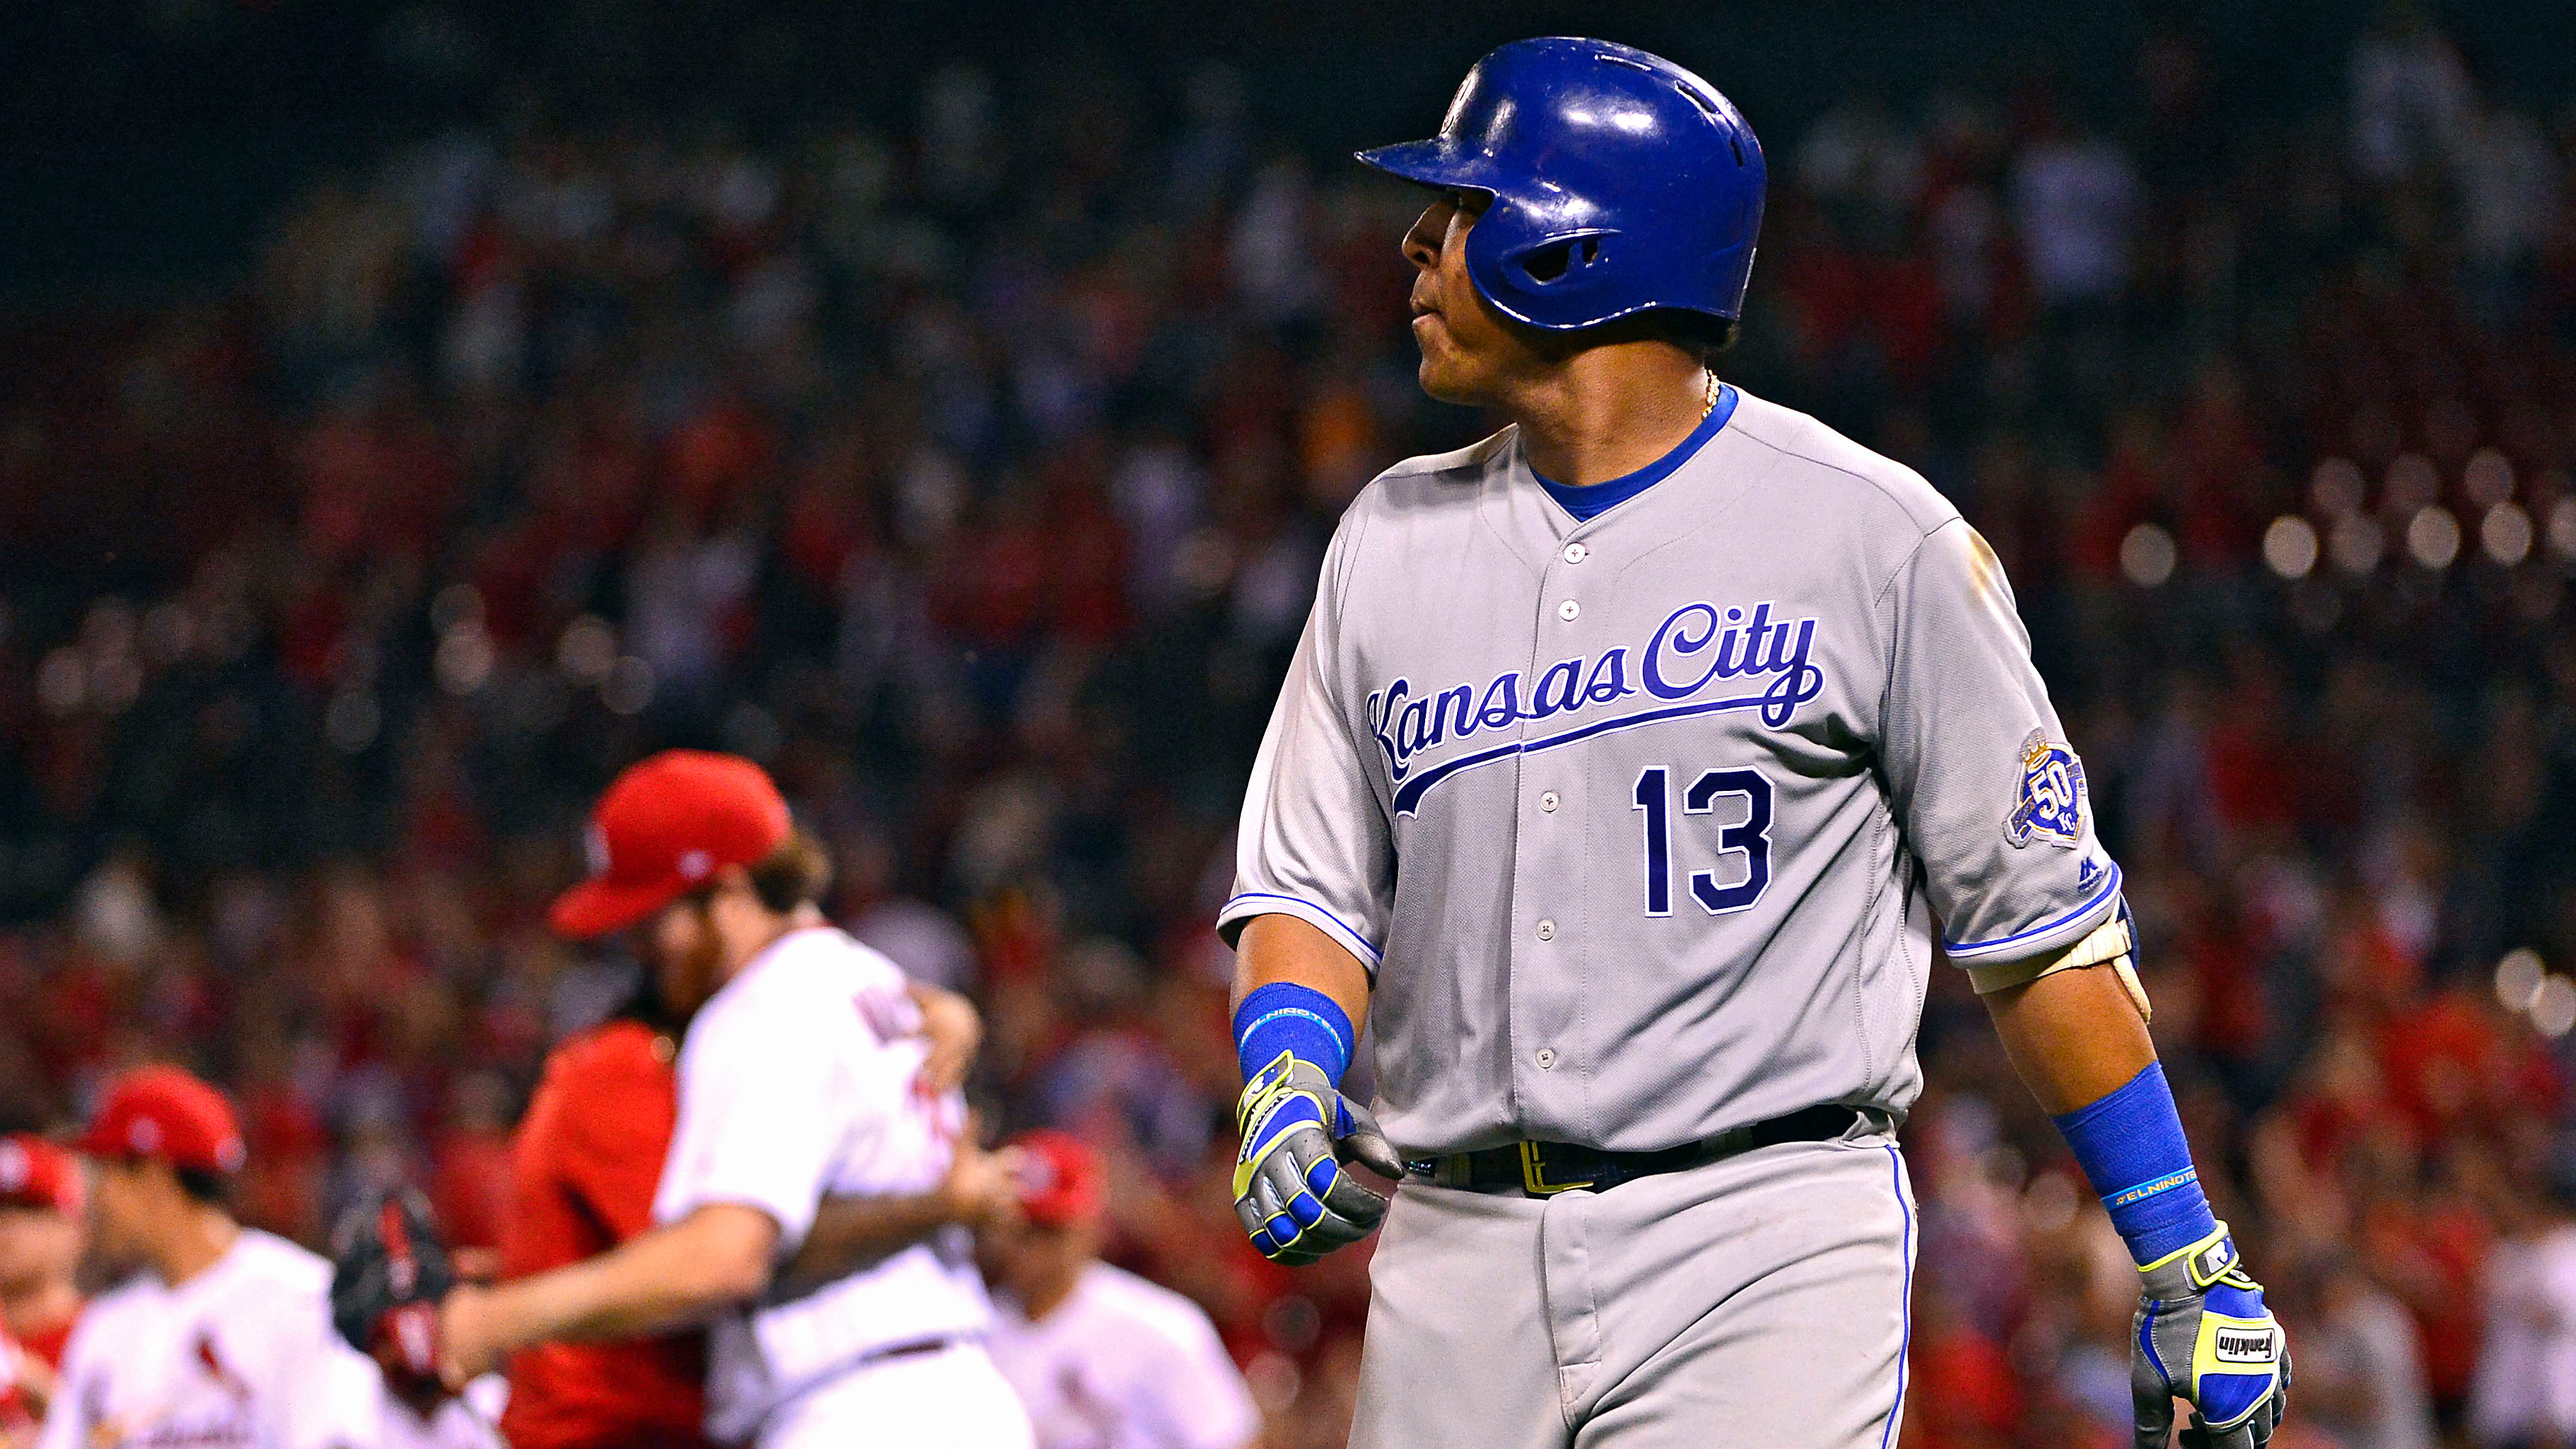 Royals can't solve Cards' starter in 6-0 loss